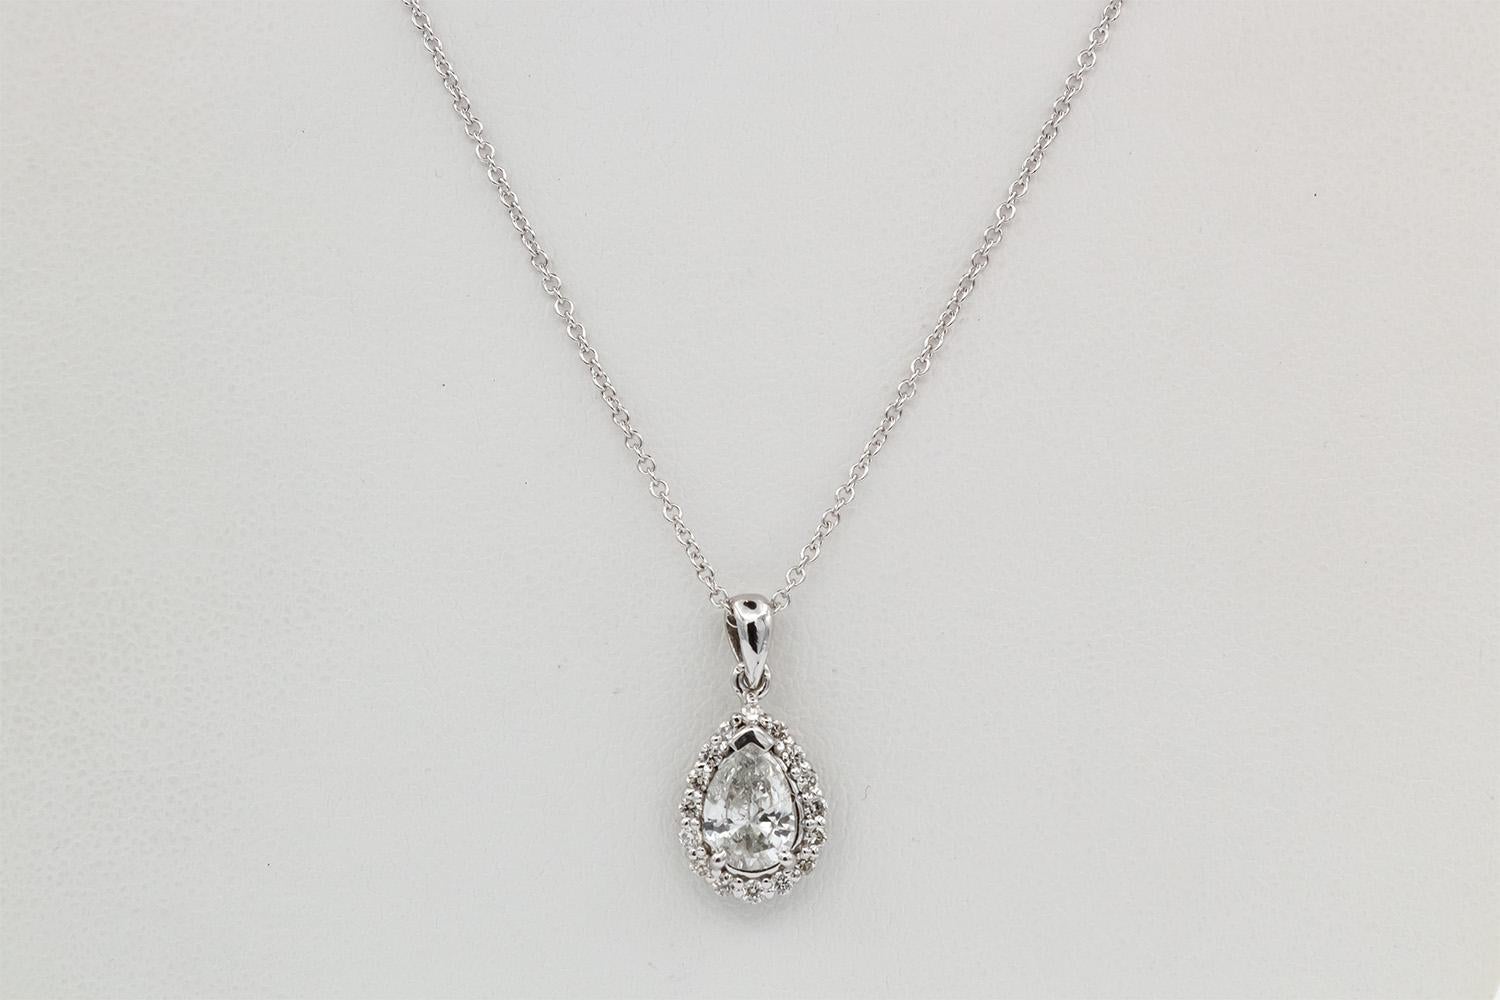 We are pleased to present this 14k White Gold & Pear Diamond Halo Pendant Necklace. This cute piece features a 0.93ct I-J/I1-I2 pear cut diamond set in a 14k white gold halo pendant with 0.24ctw round brilliant cut diamonds on a 14k white gold